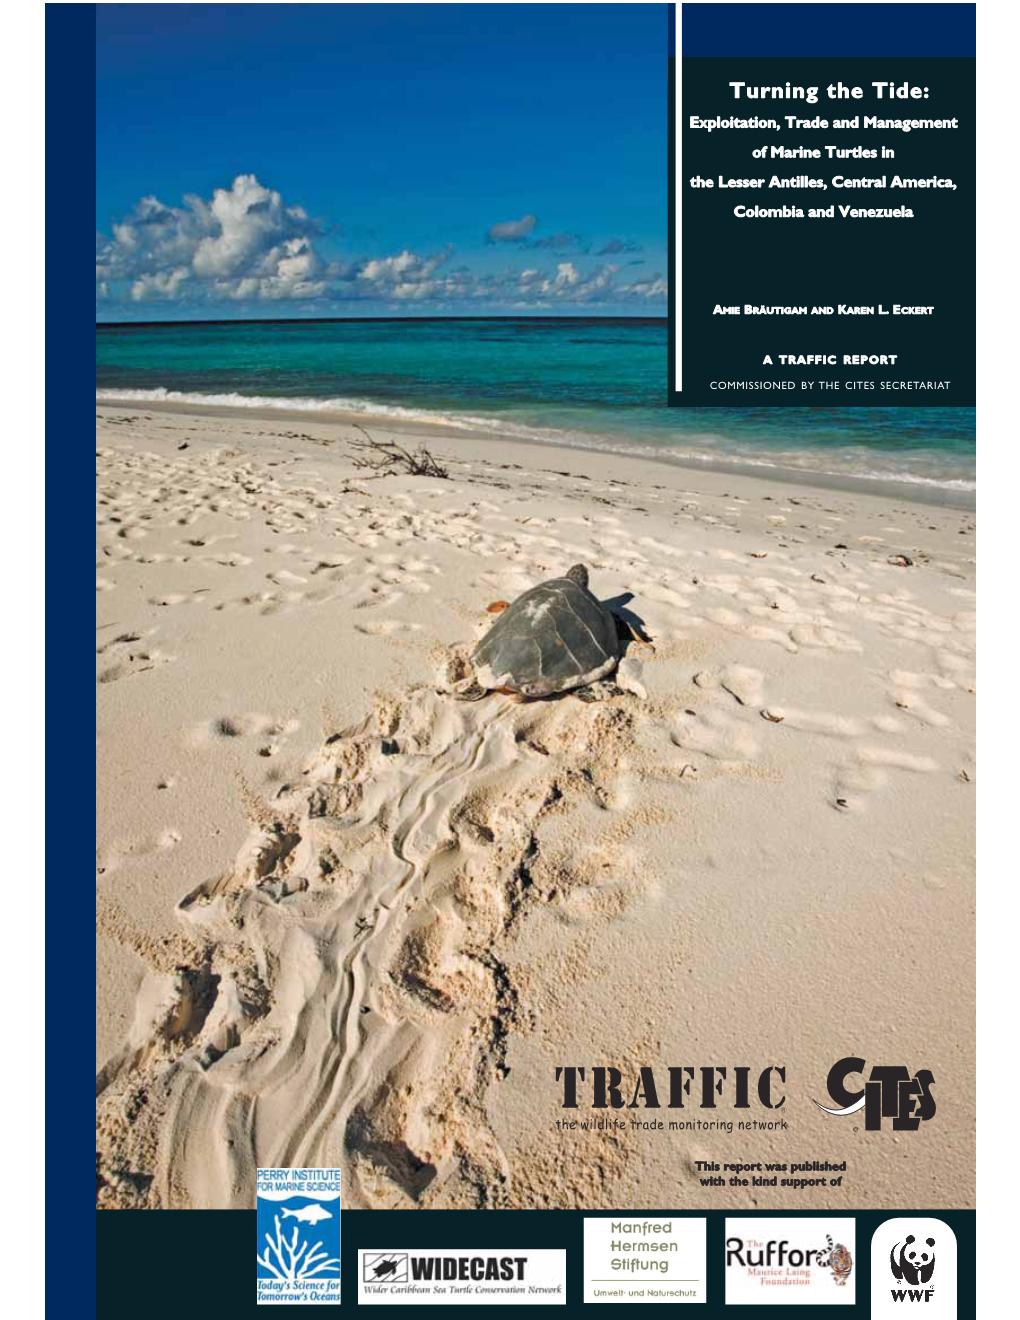 Turning the Tide: Exploitation, Trade and Management of Marine Turtles in the Lesser Antilles, Central America, Colombia and Venezuela